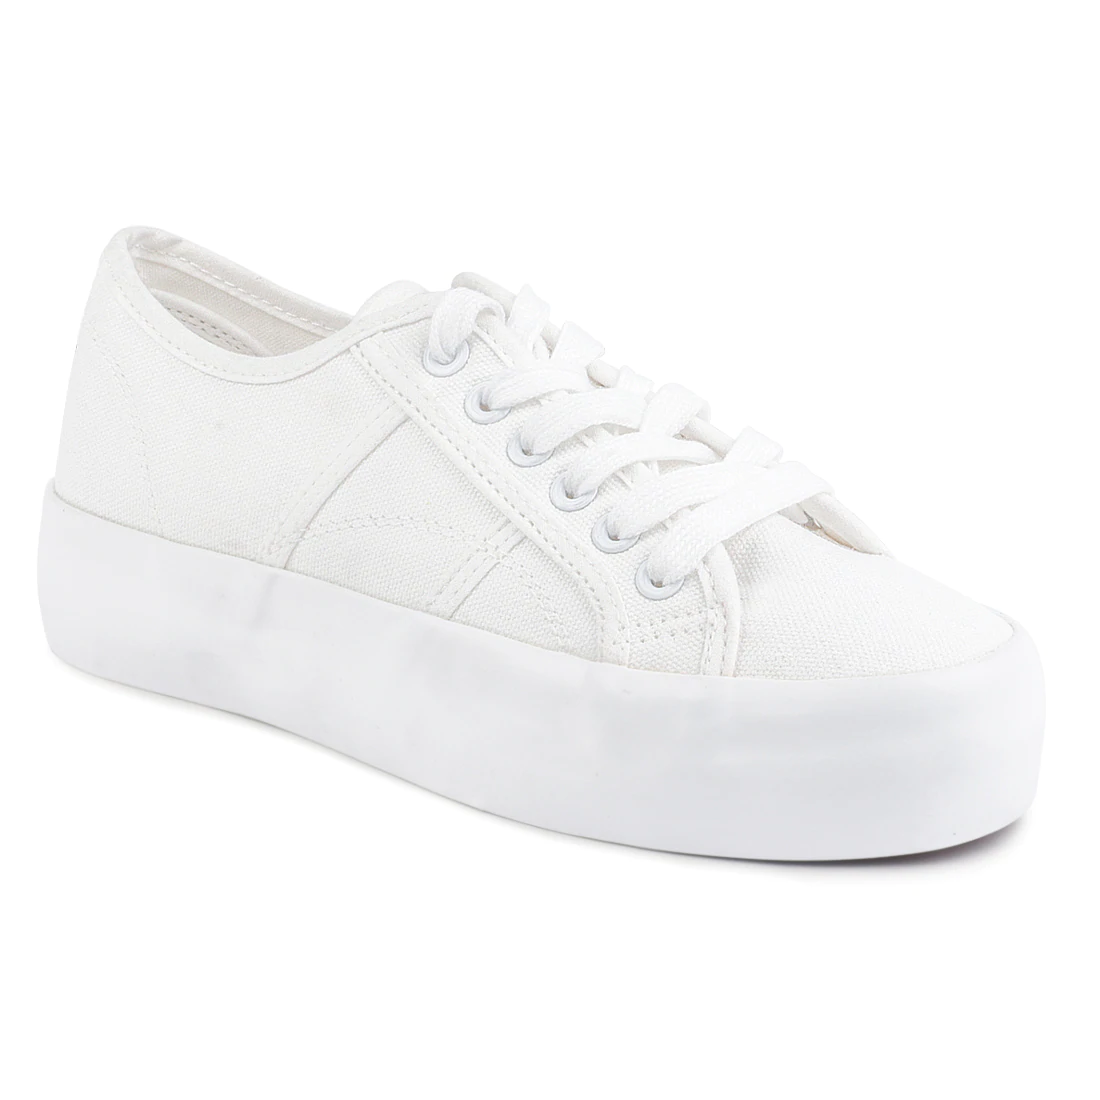 WHITE SOLID PLATFORM LACE UP SNEAKERS